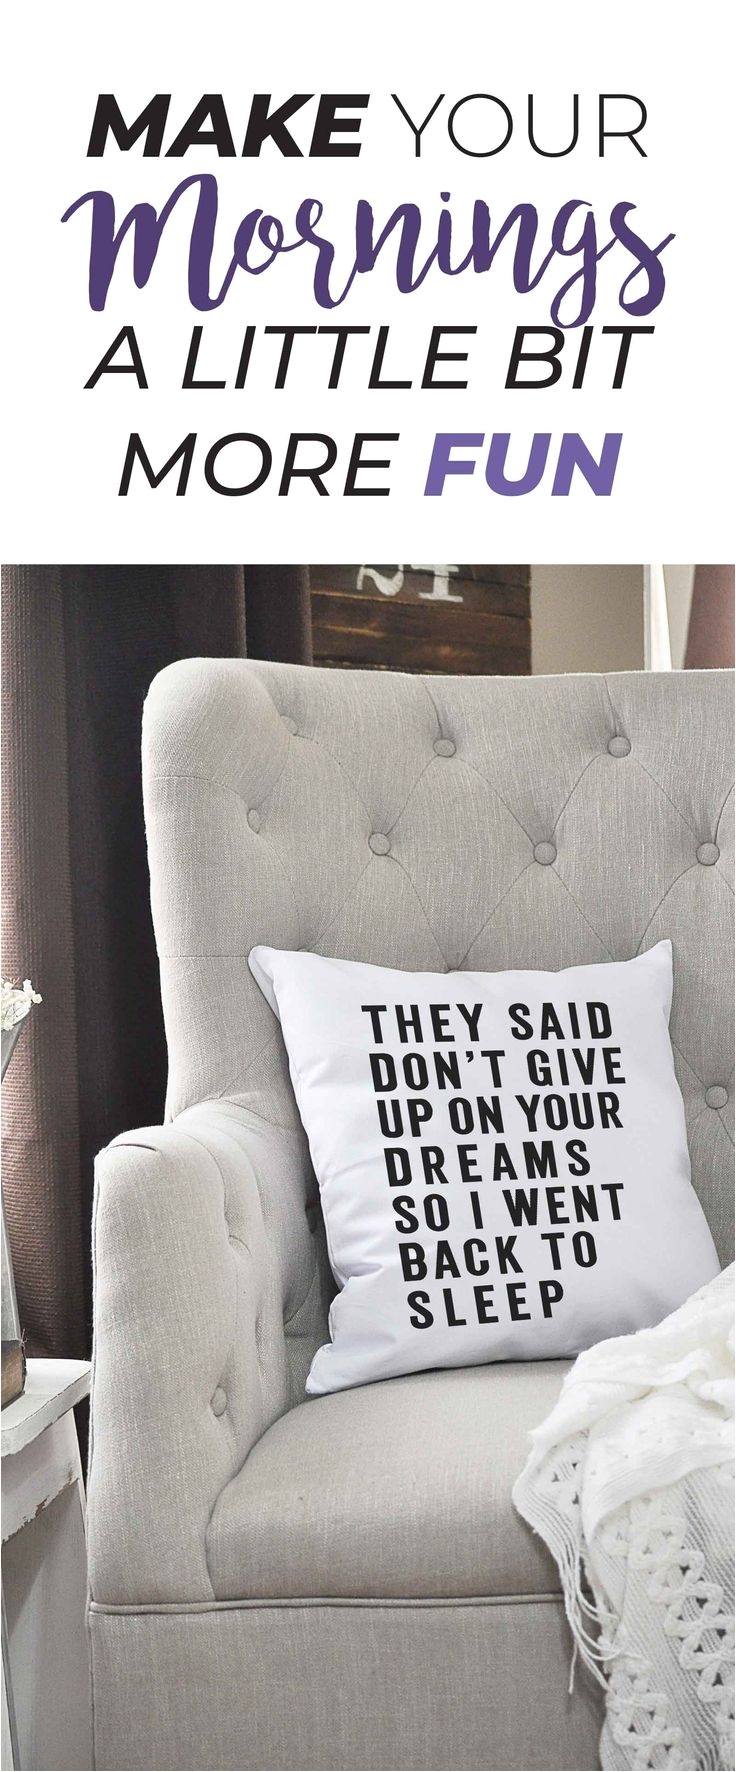 Best Place to Buy Decorative Pillows toronto 17 Best Cute Funny Home Decor Throw Pillow Gifts Images On